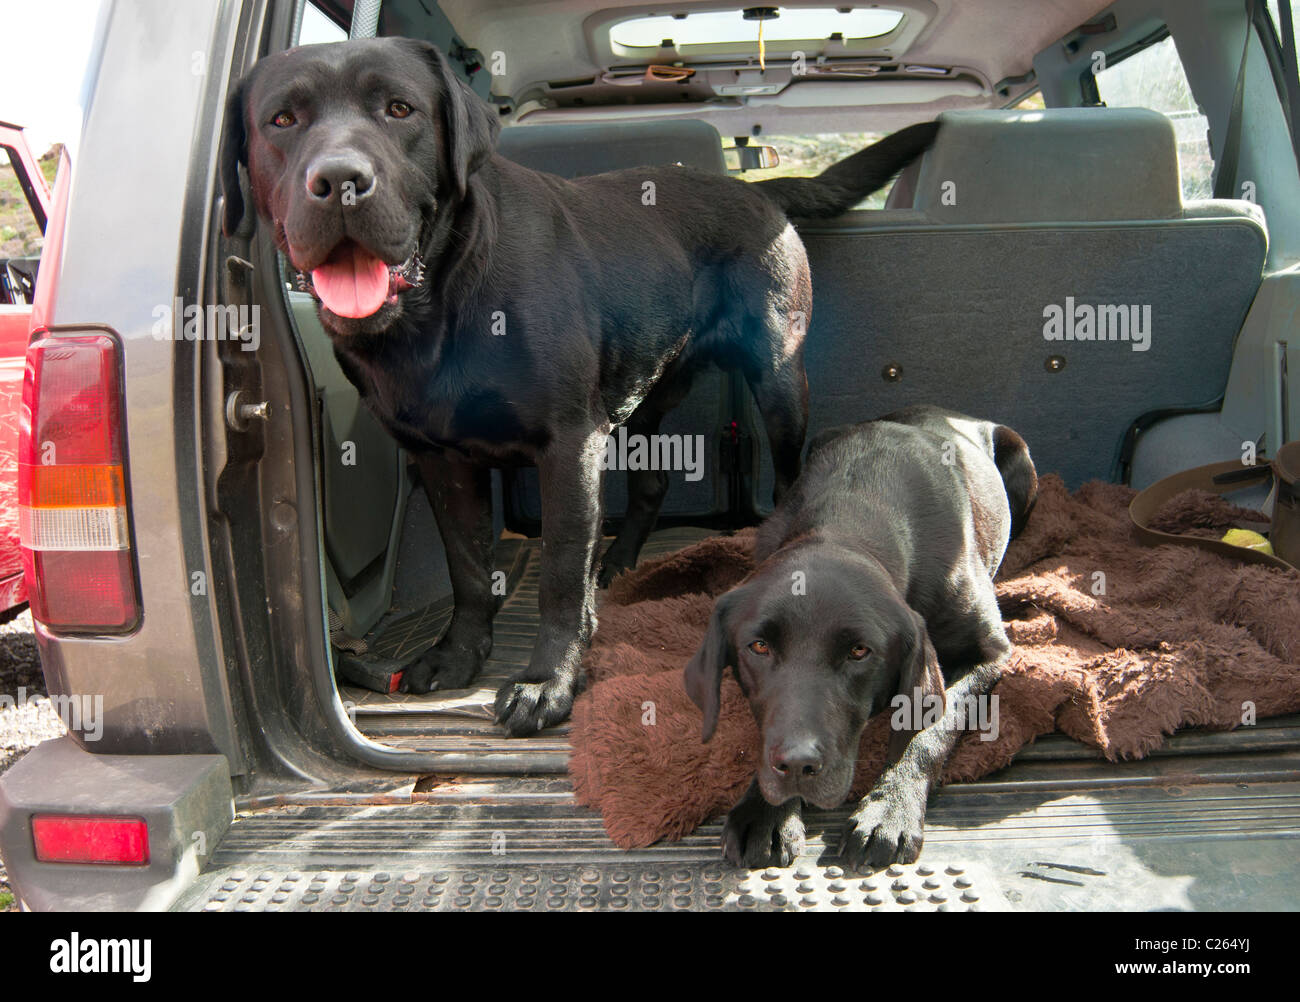 Two black Labrador dogs sat in the back of a 4x4 car resting on a grouse shooting day waiting for their owners Stock Photo